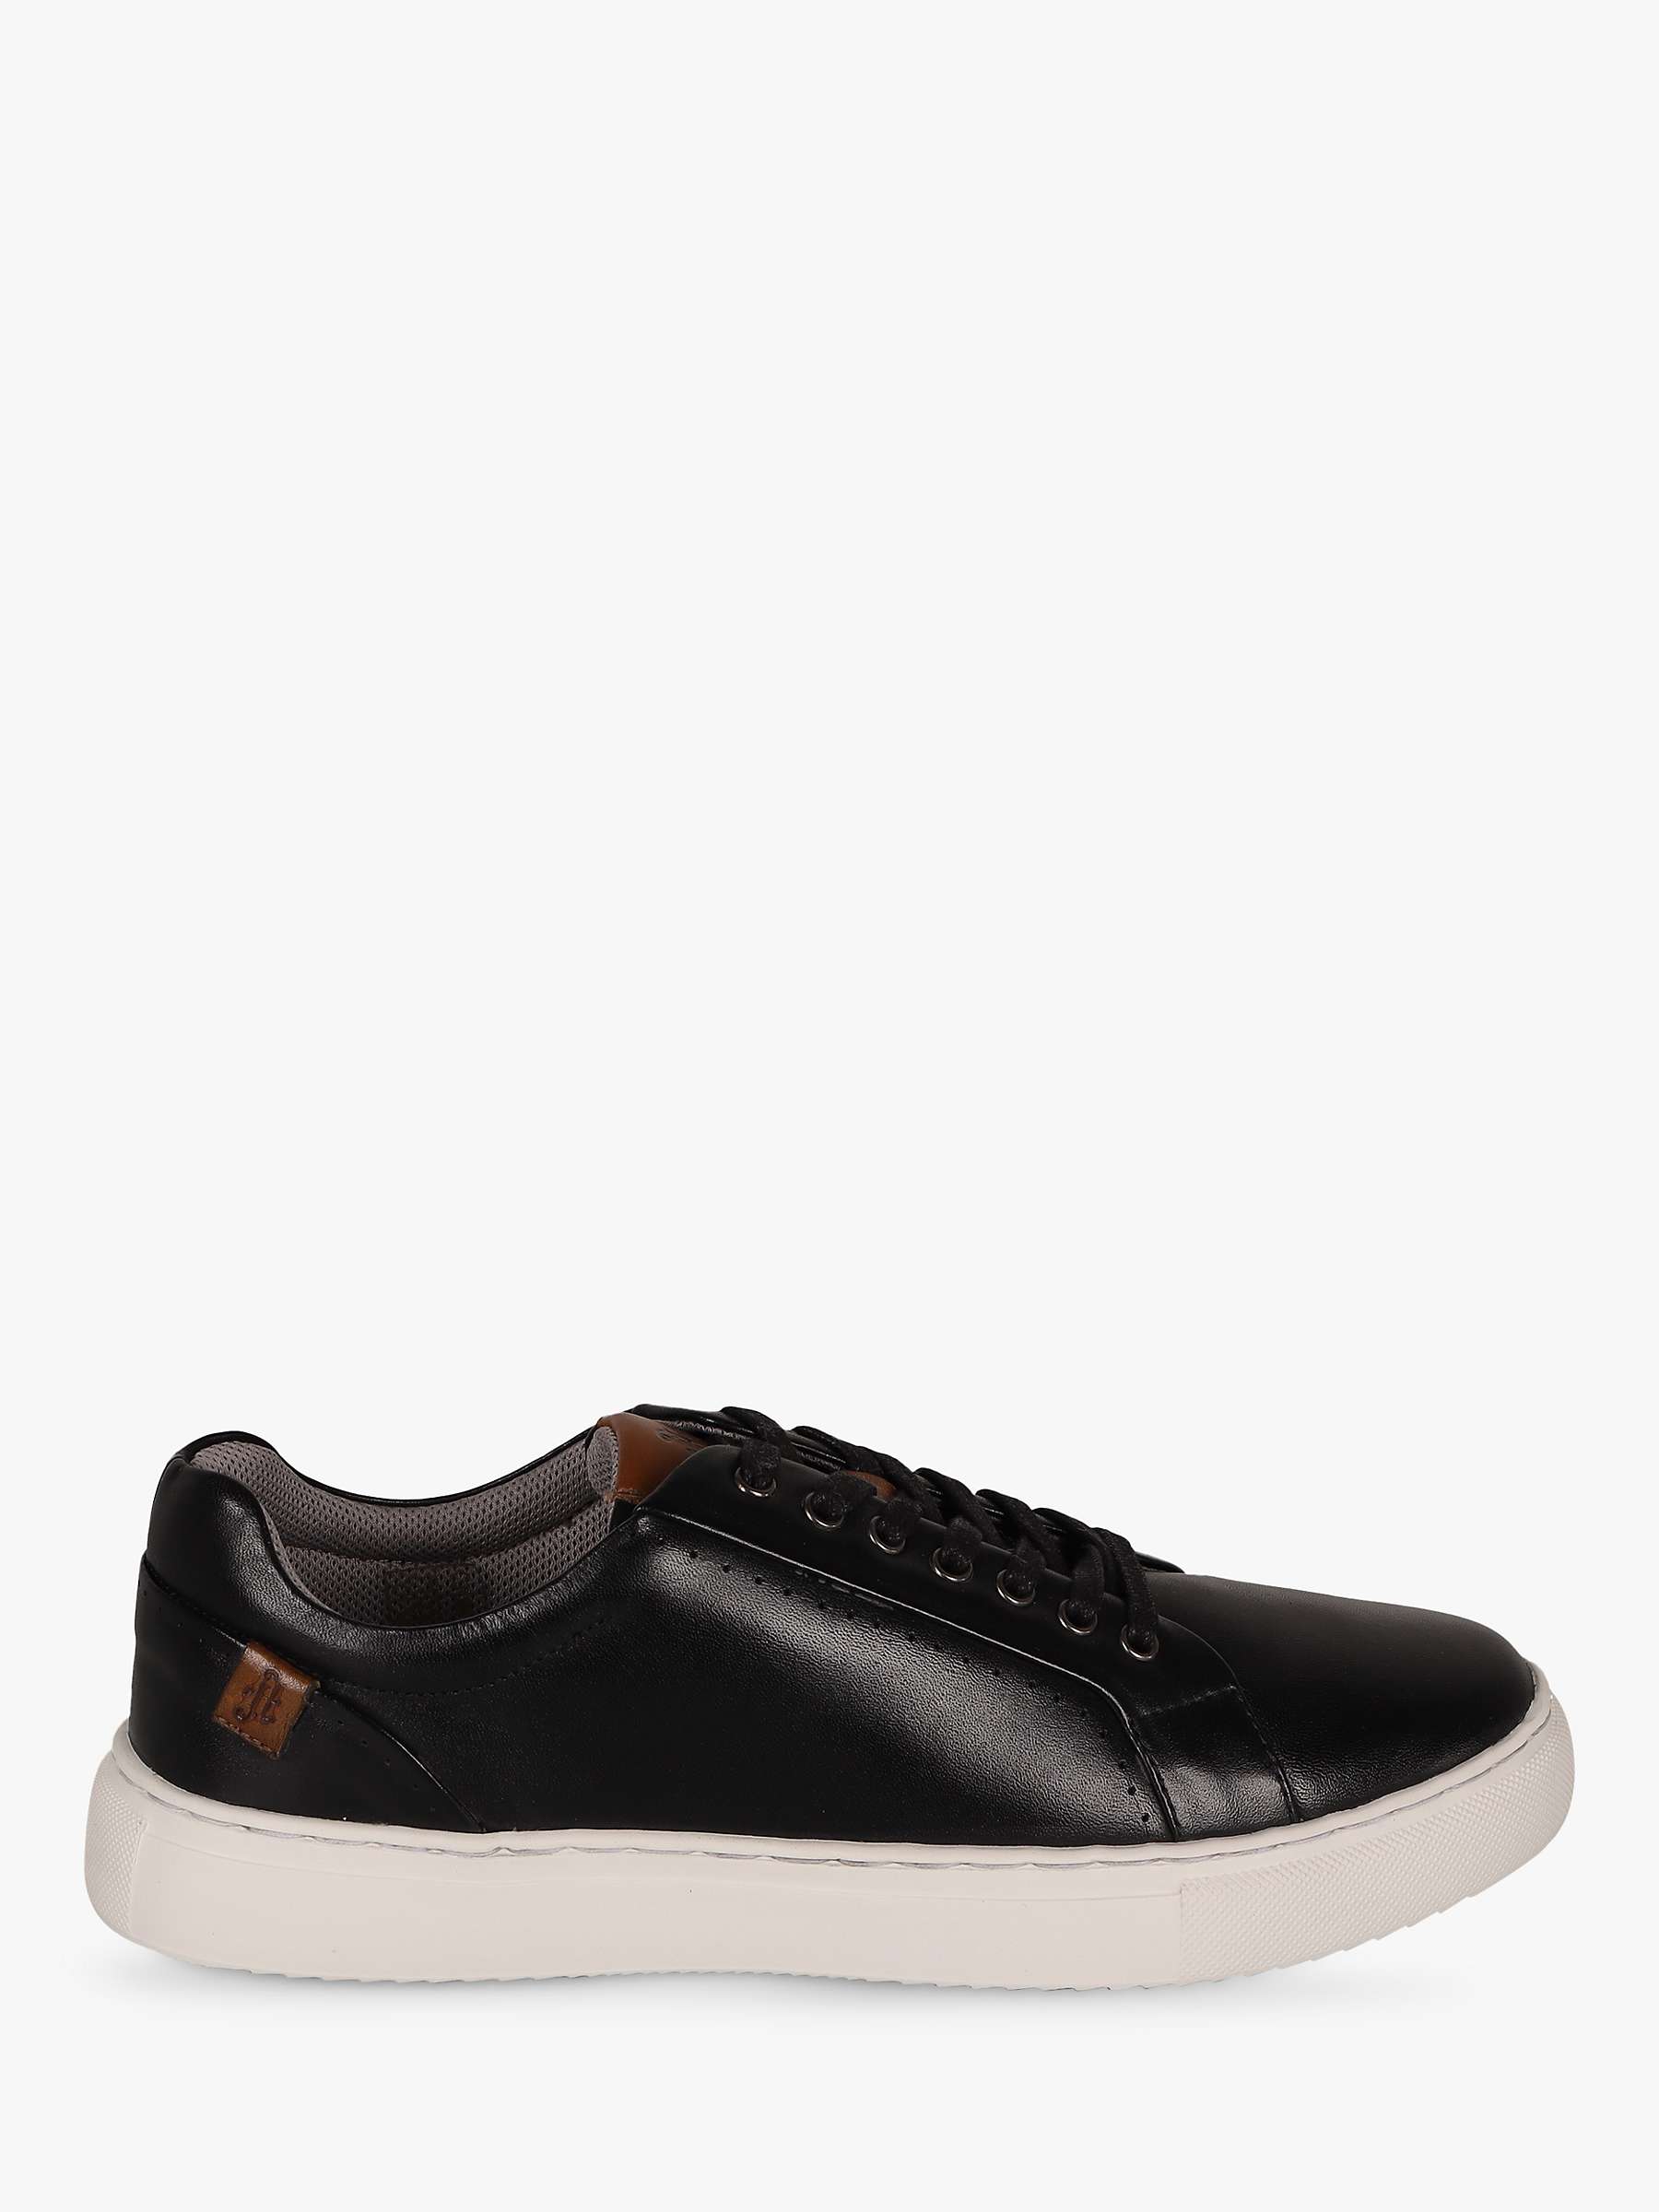 Buy Silver Street London Amen Collection Carlow Leather Trainers, Black Online at johnlewis.com